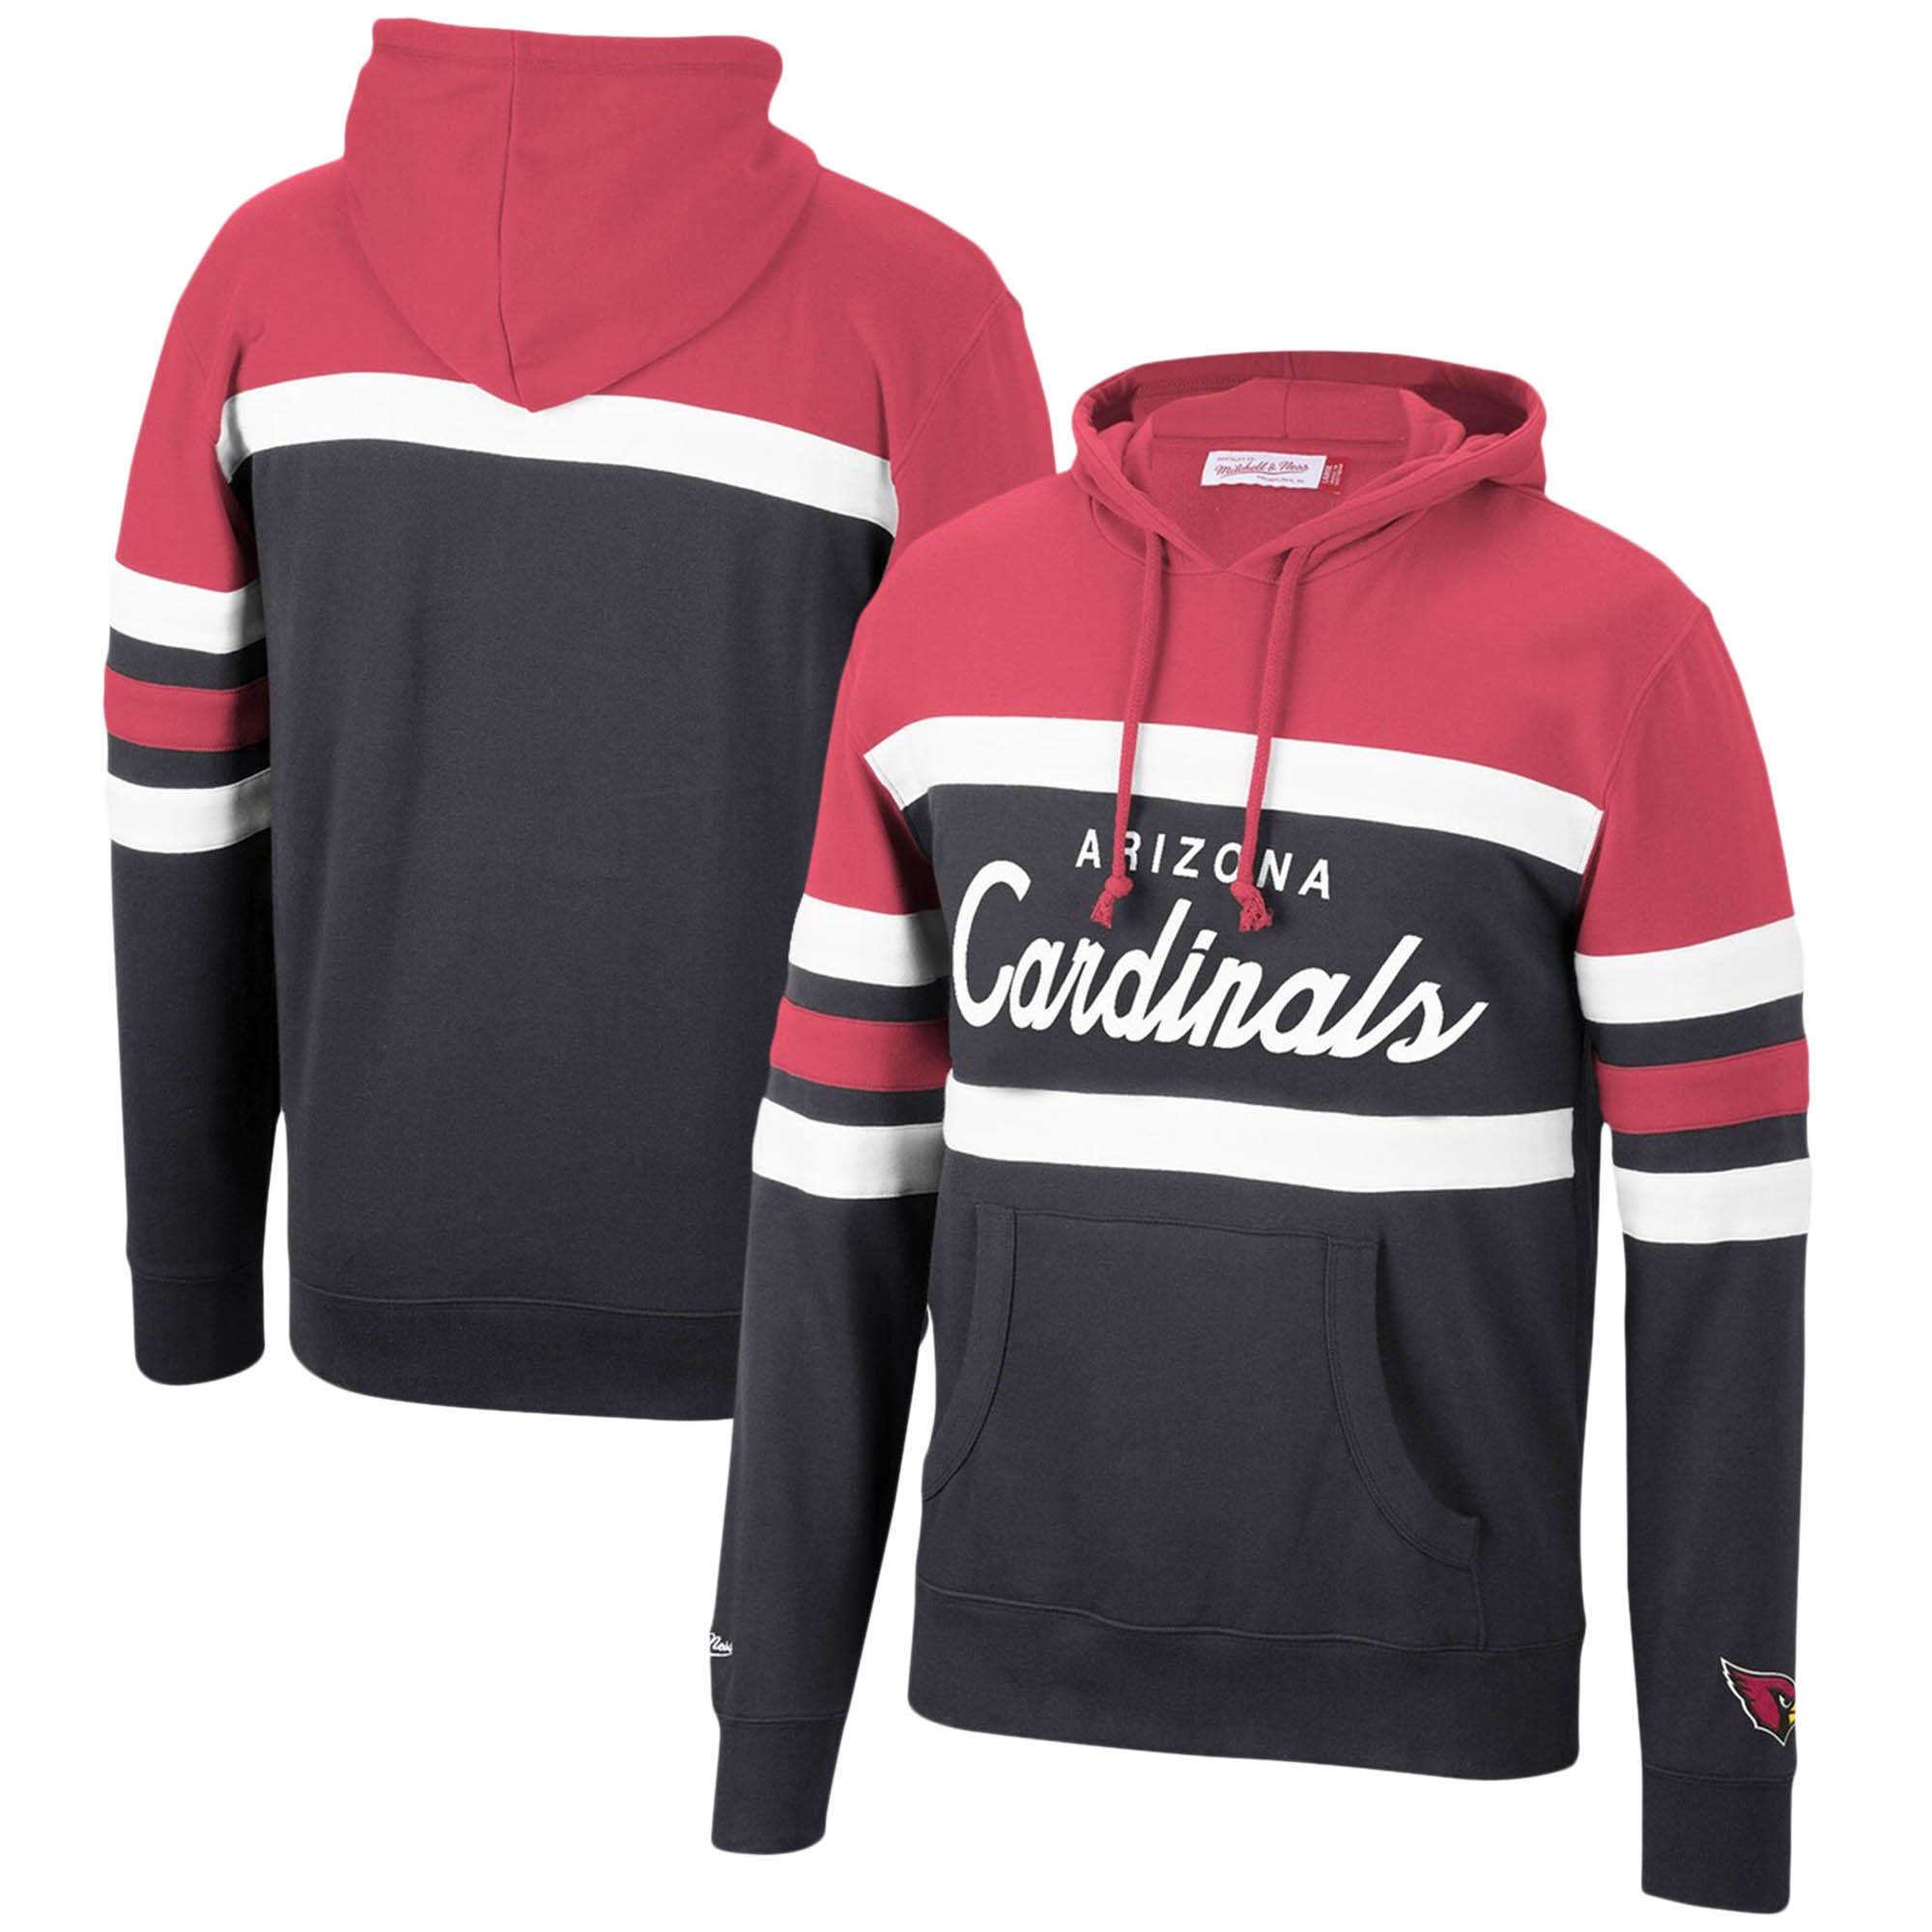 Men's Mitchell & Ness Red St. Louis Cardinals Head Coach Pullover Hoodie